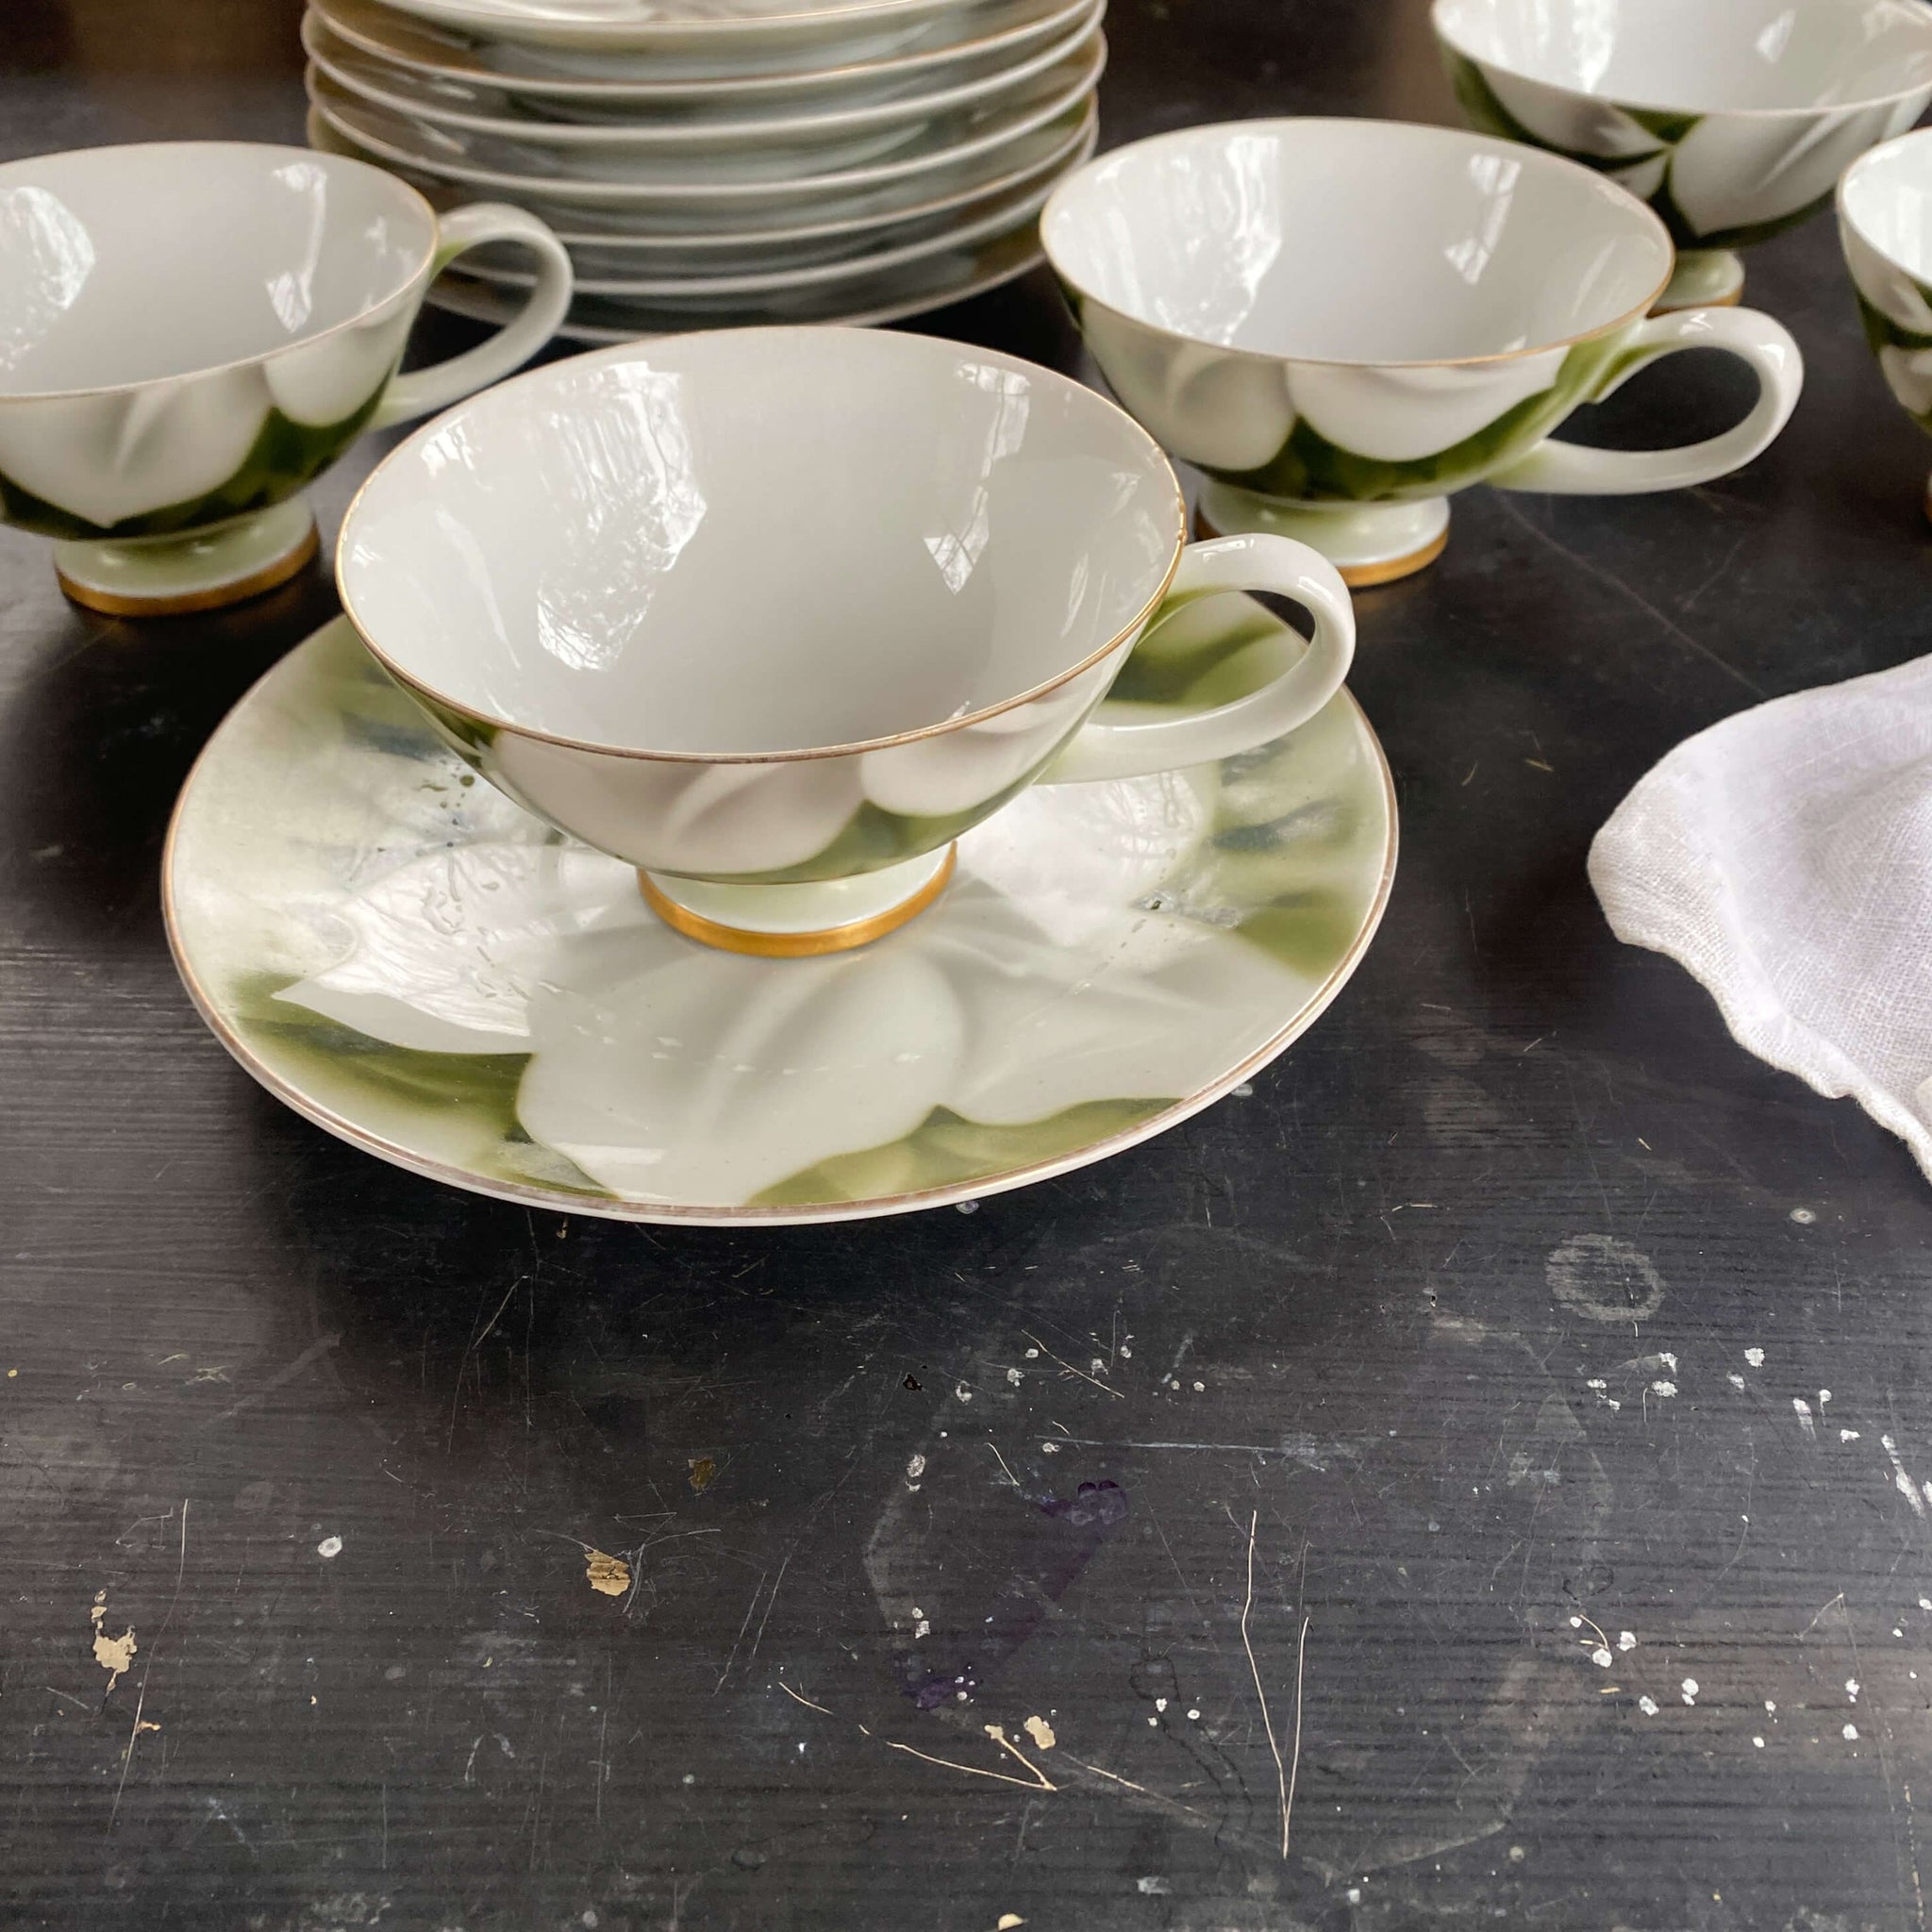 Rare Green and White Porcelain Cups & Saucers by Syunzan - White Lily Flower Design - Five Available